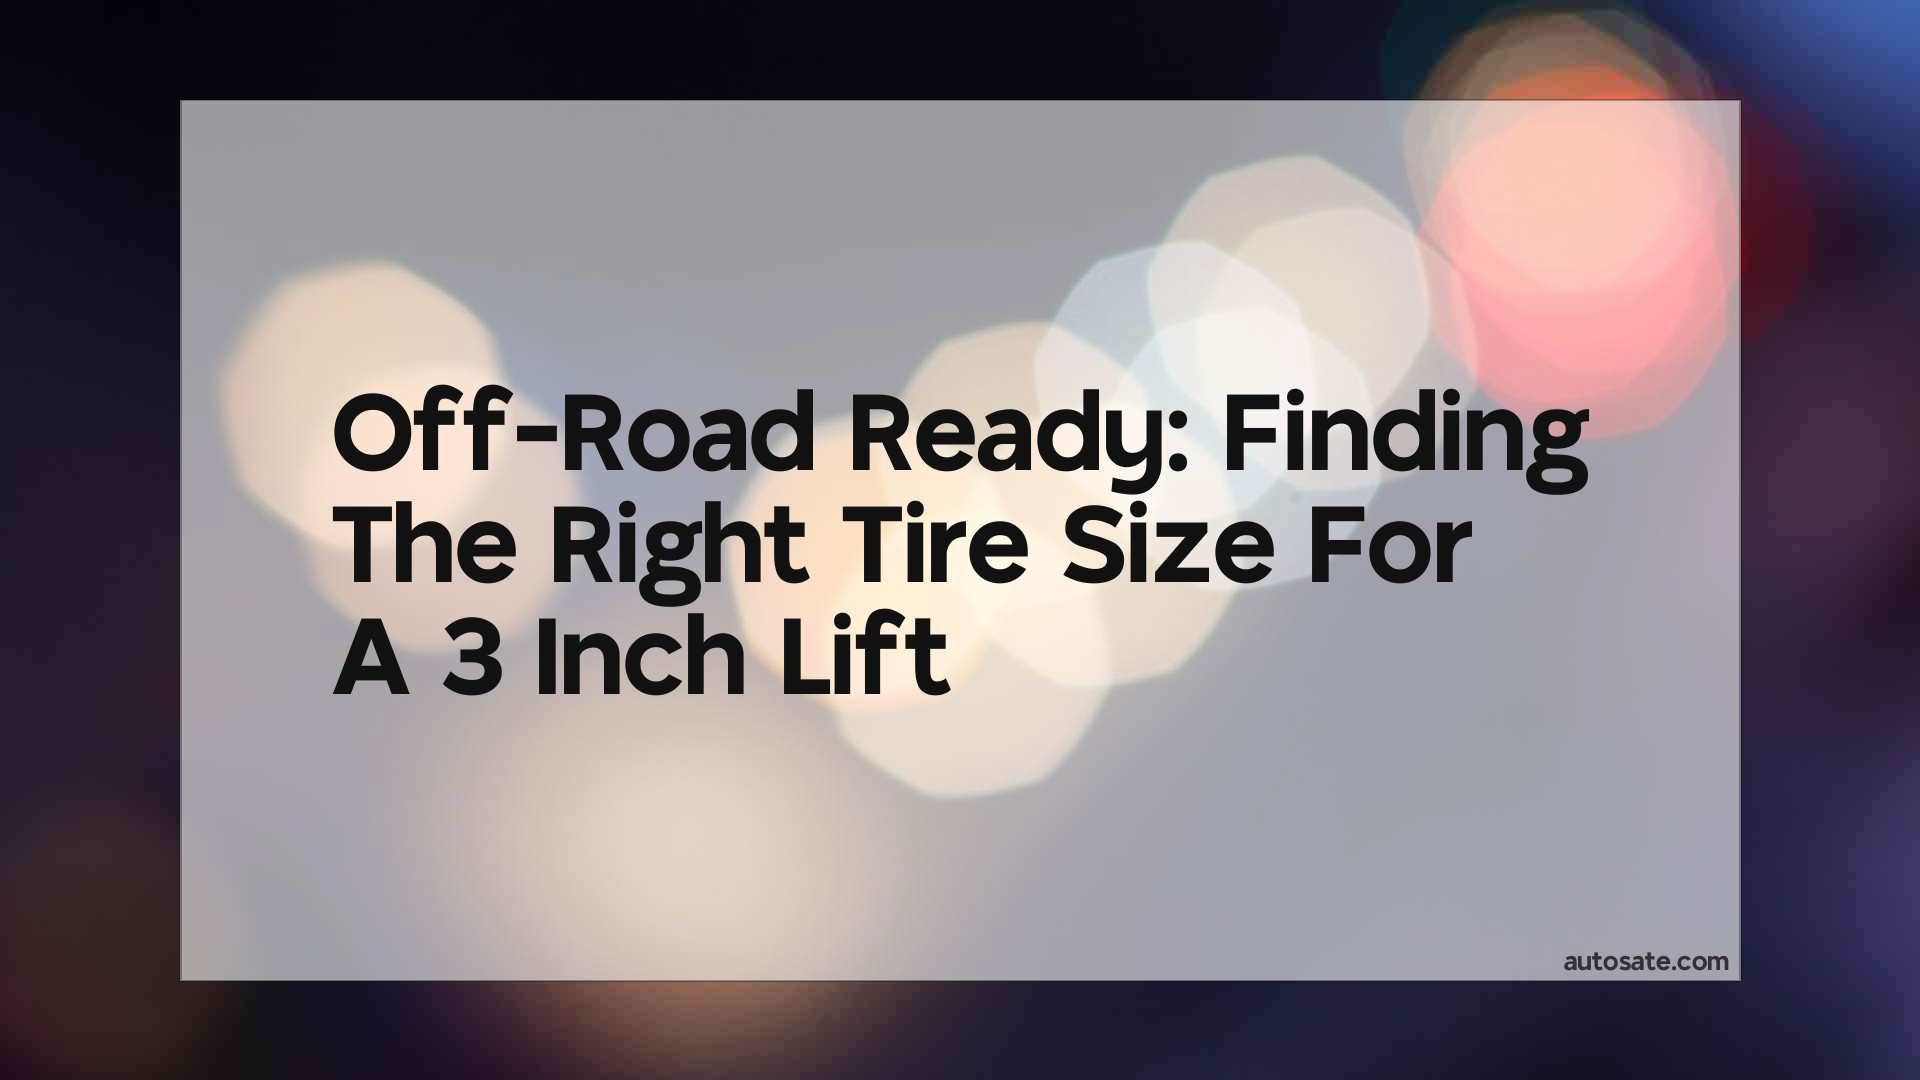 Off-Road Ready: Finding The Right Tire Size For A 3 Inch Lift